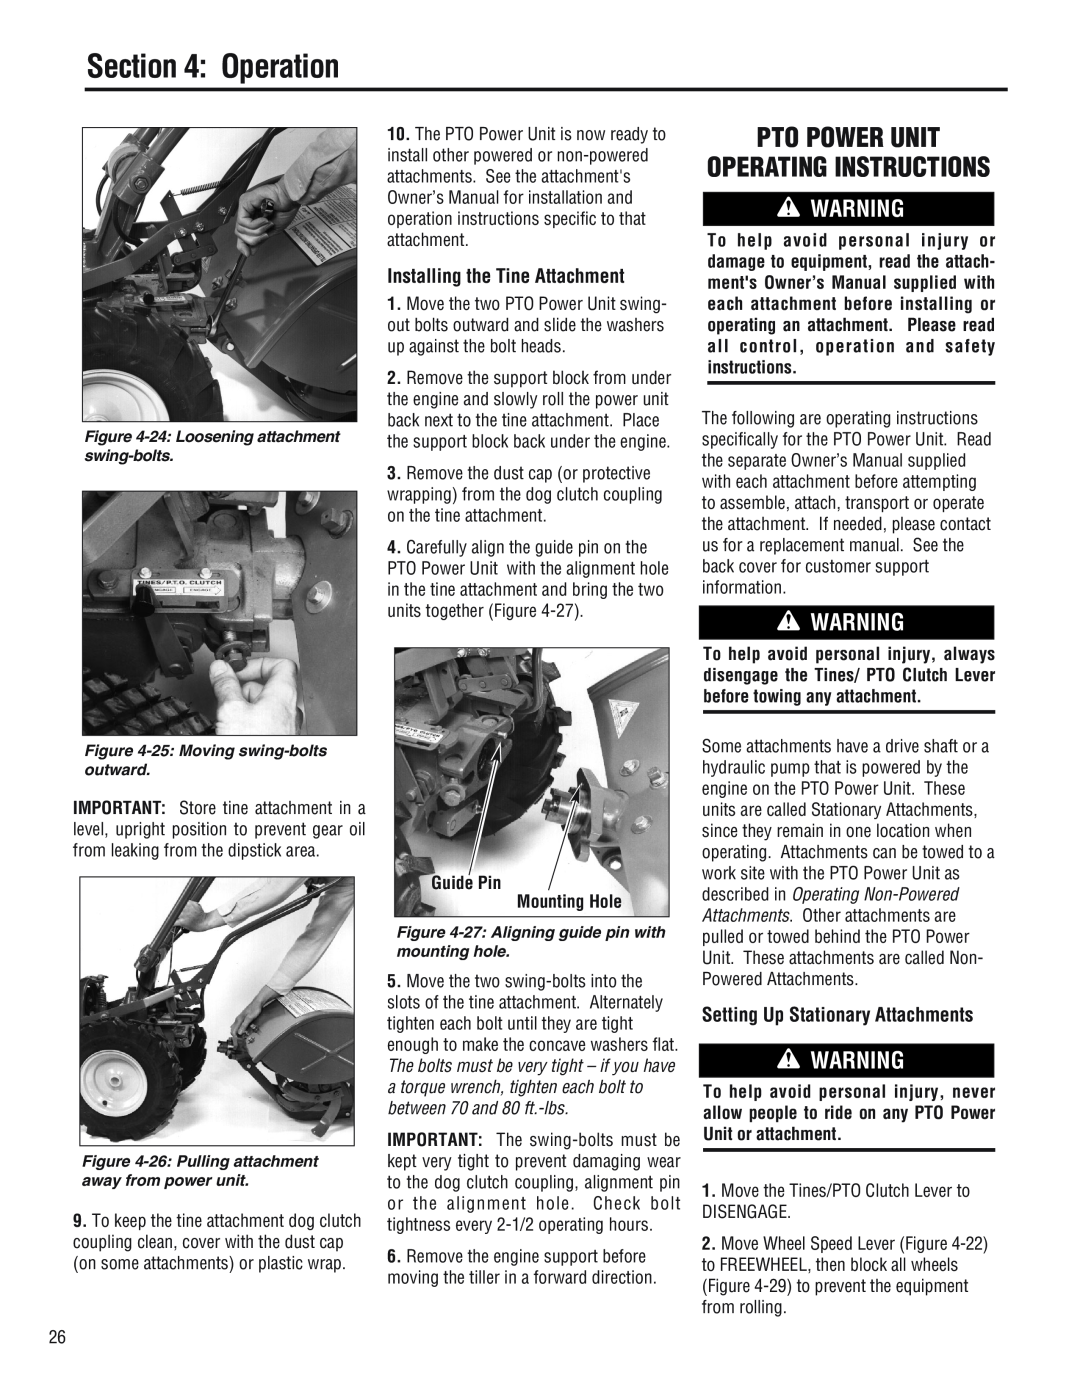 Troy-Bilt E682L Pto Power Unit Operating Instructions, Installing the Tine Attachment, Setting Up Stationary Attachments 